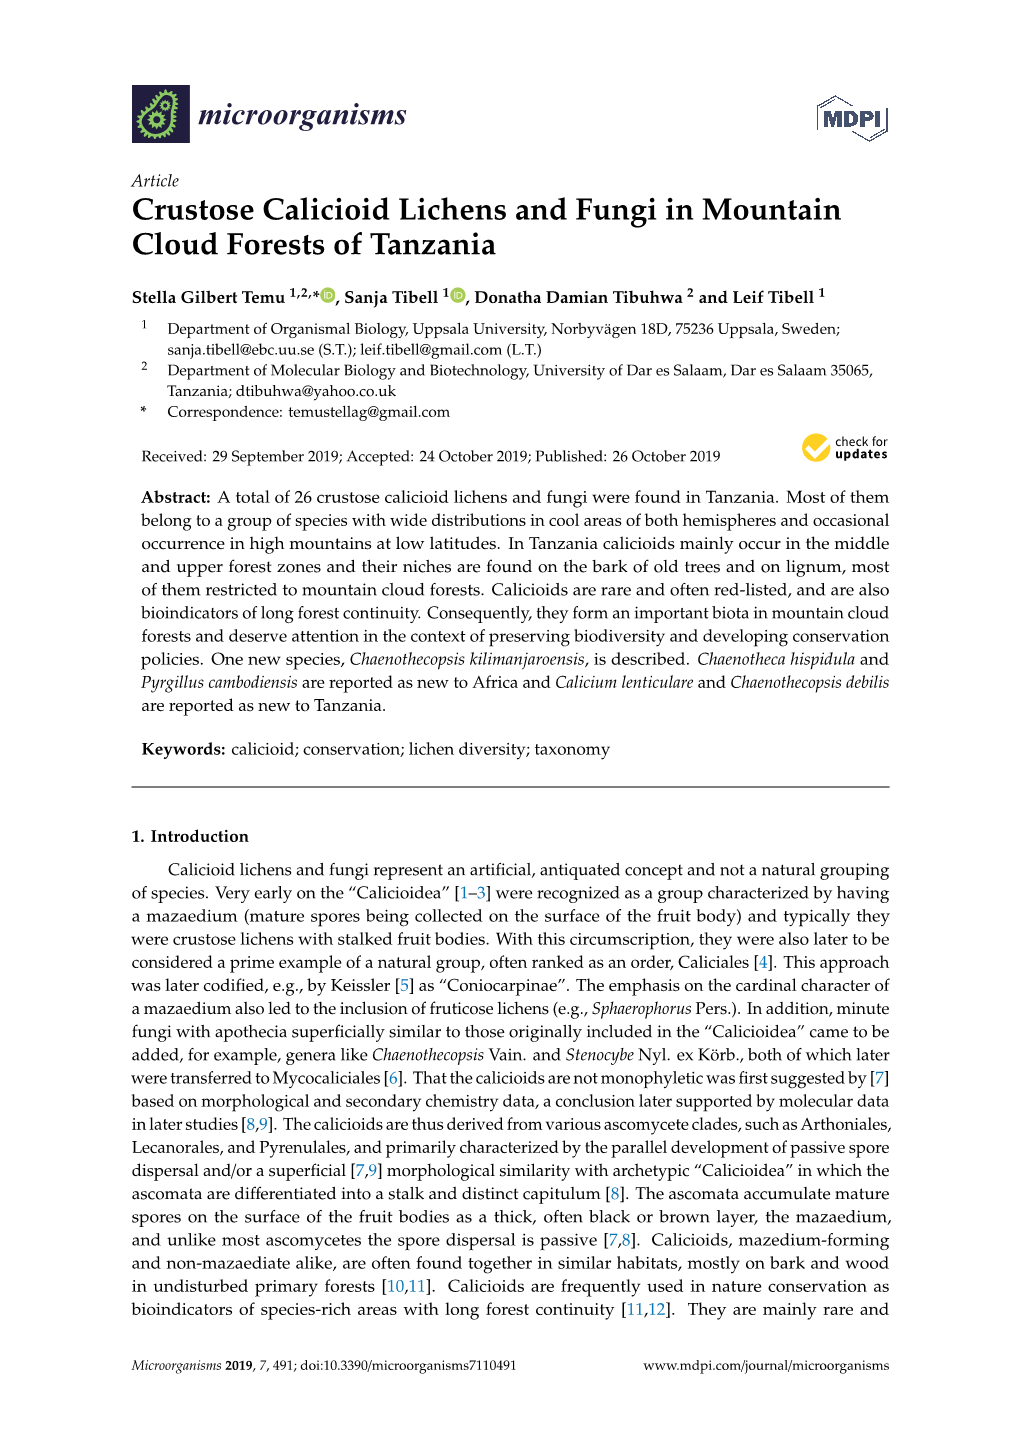 Crustose Calicioid Lichens and Fungi in Mountain Cloud Forests of Tanzania